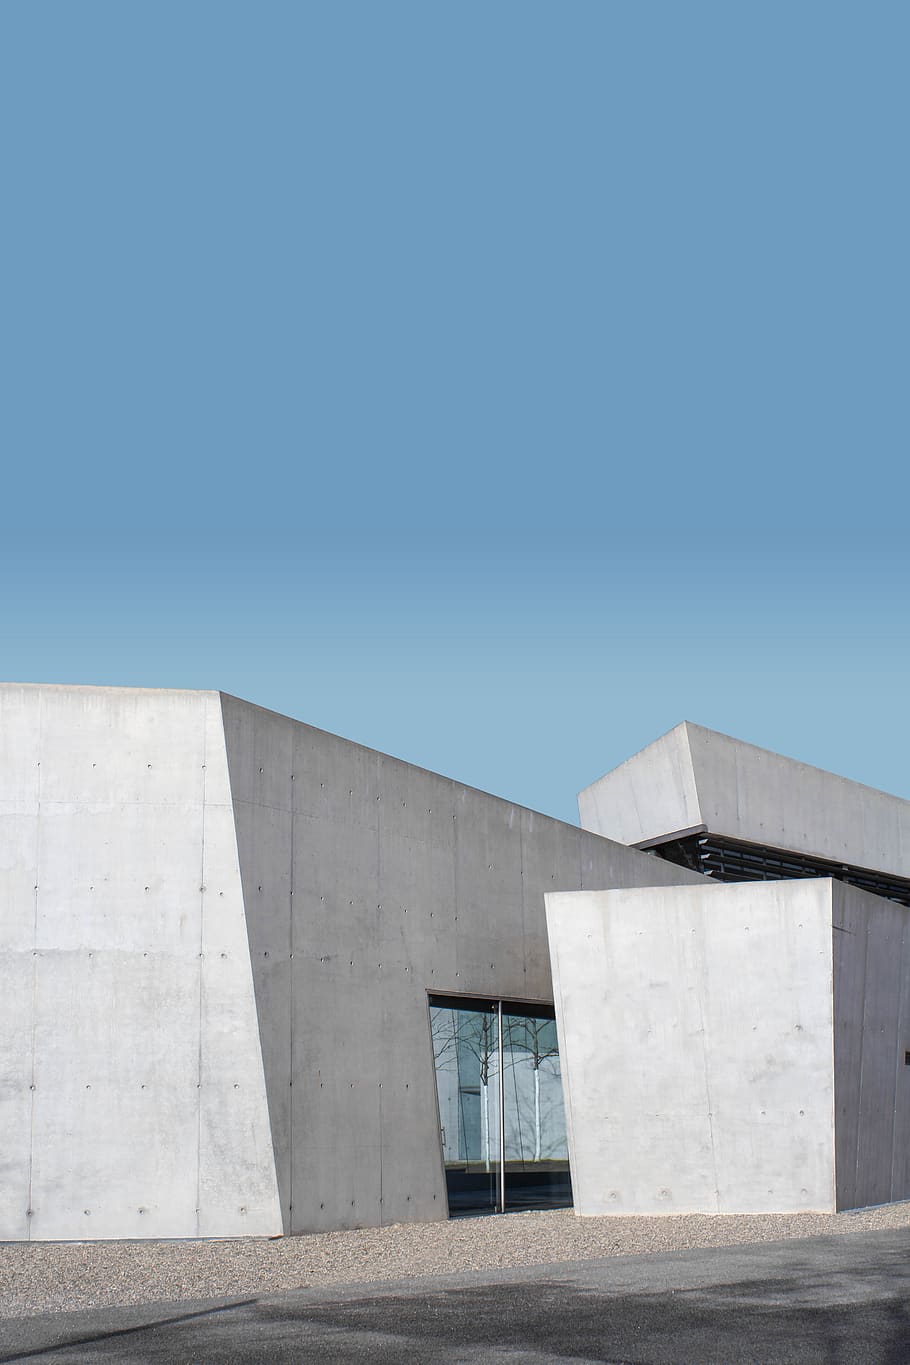 white concrete building under blue sky during daytime, architecture